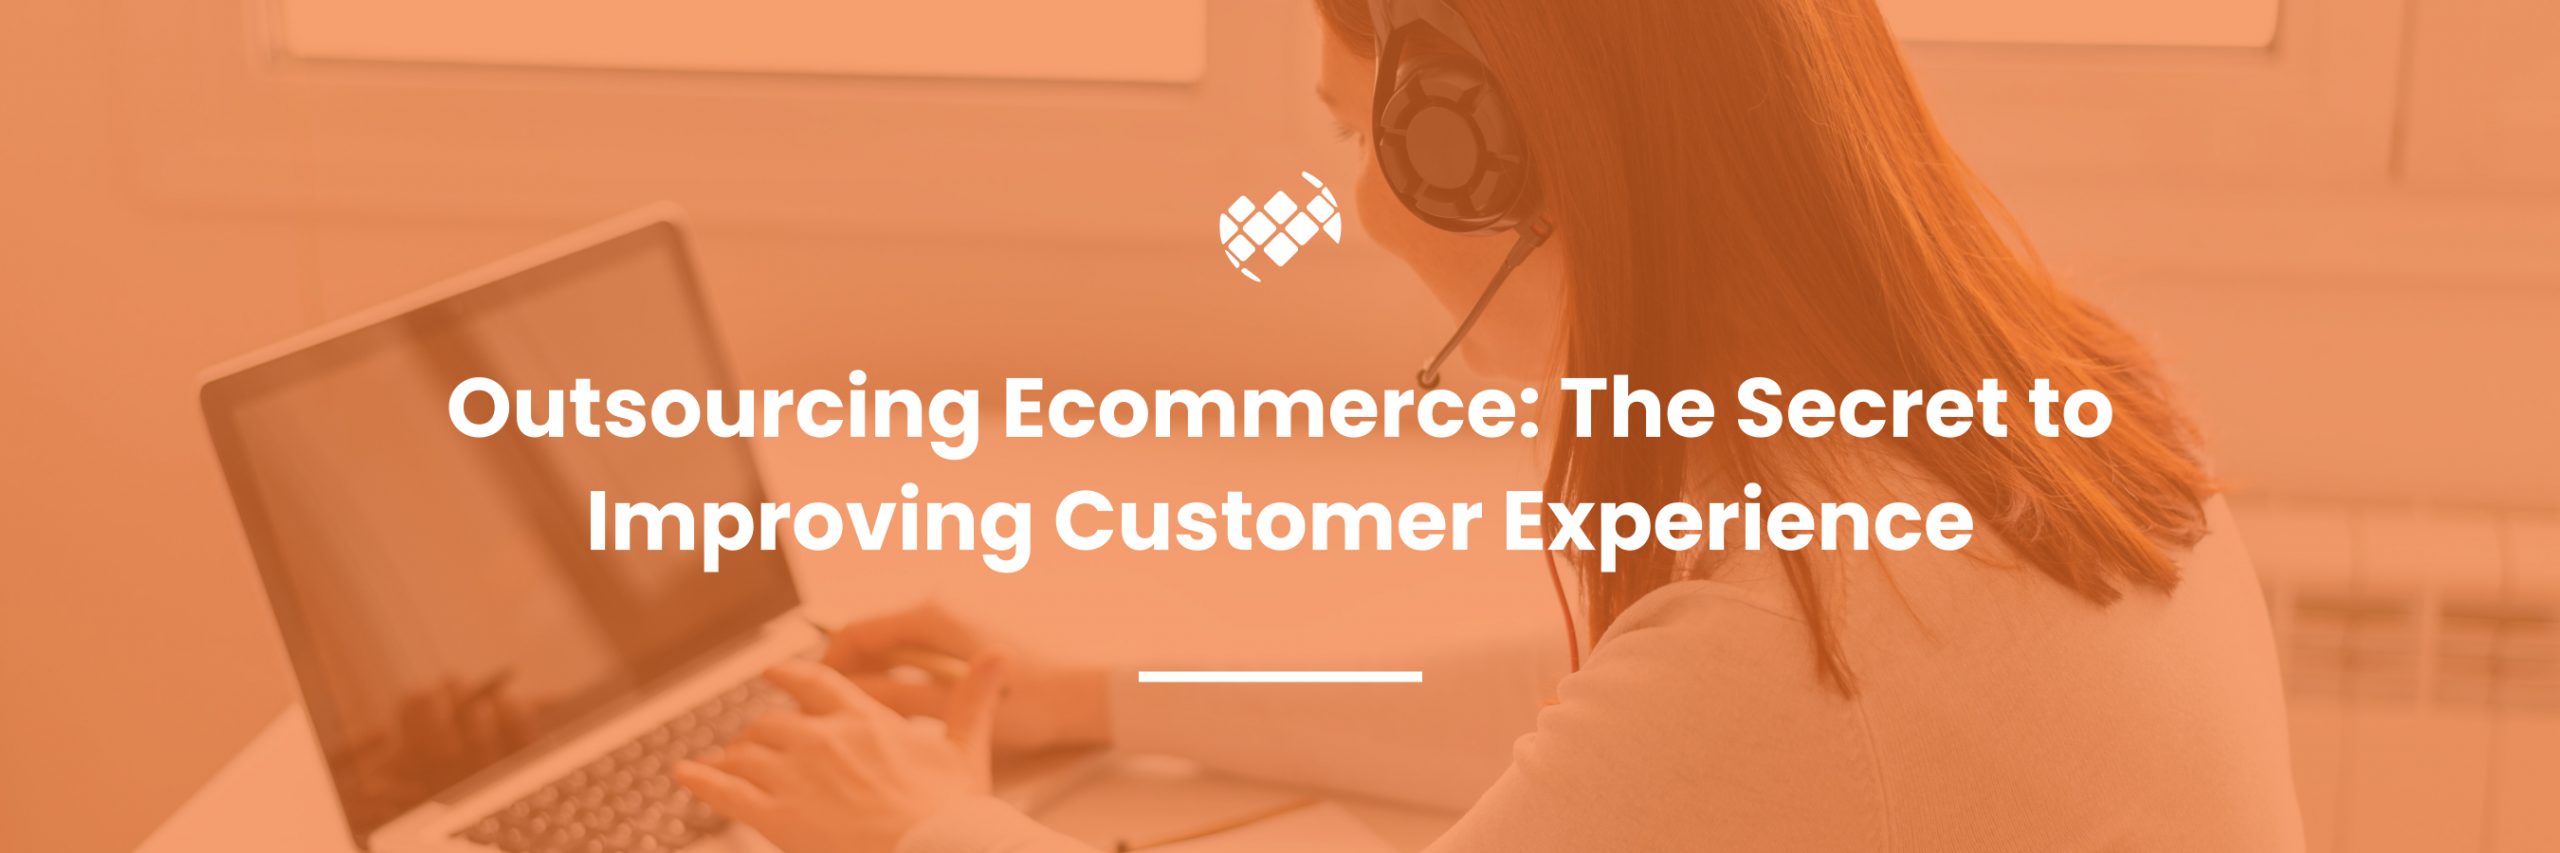 Outsourcing ecommerce